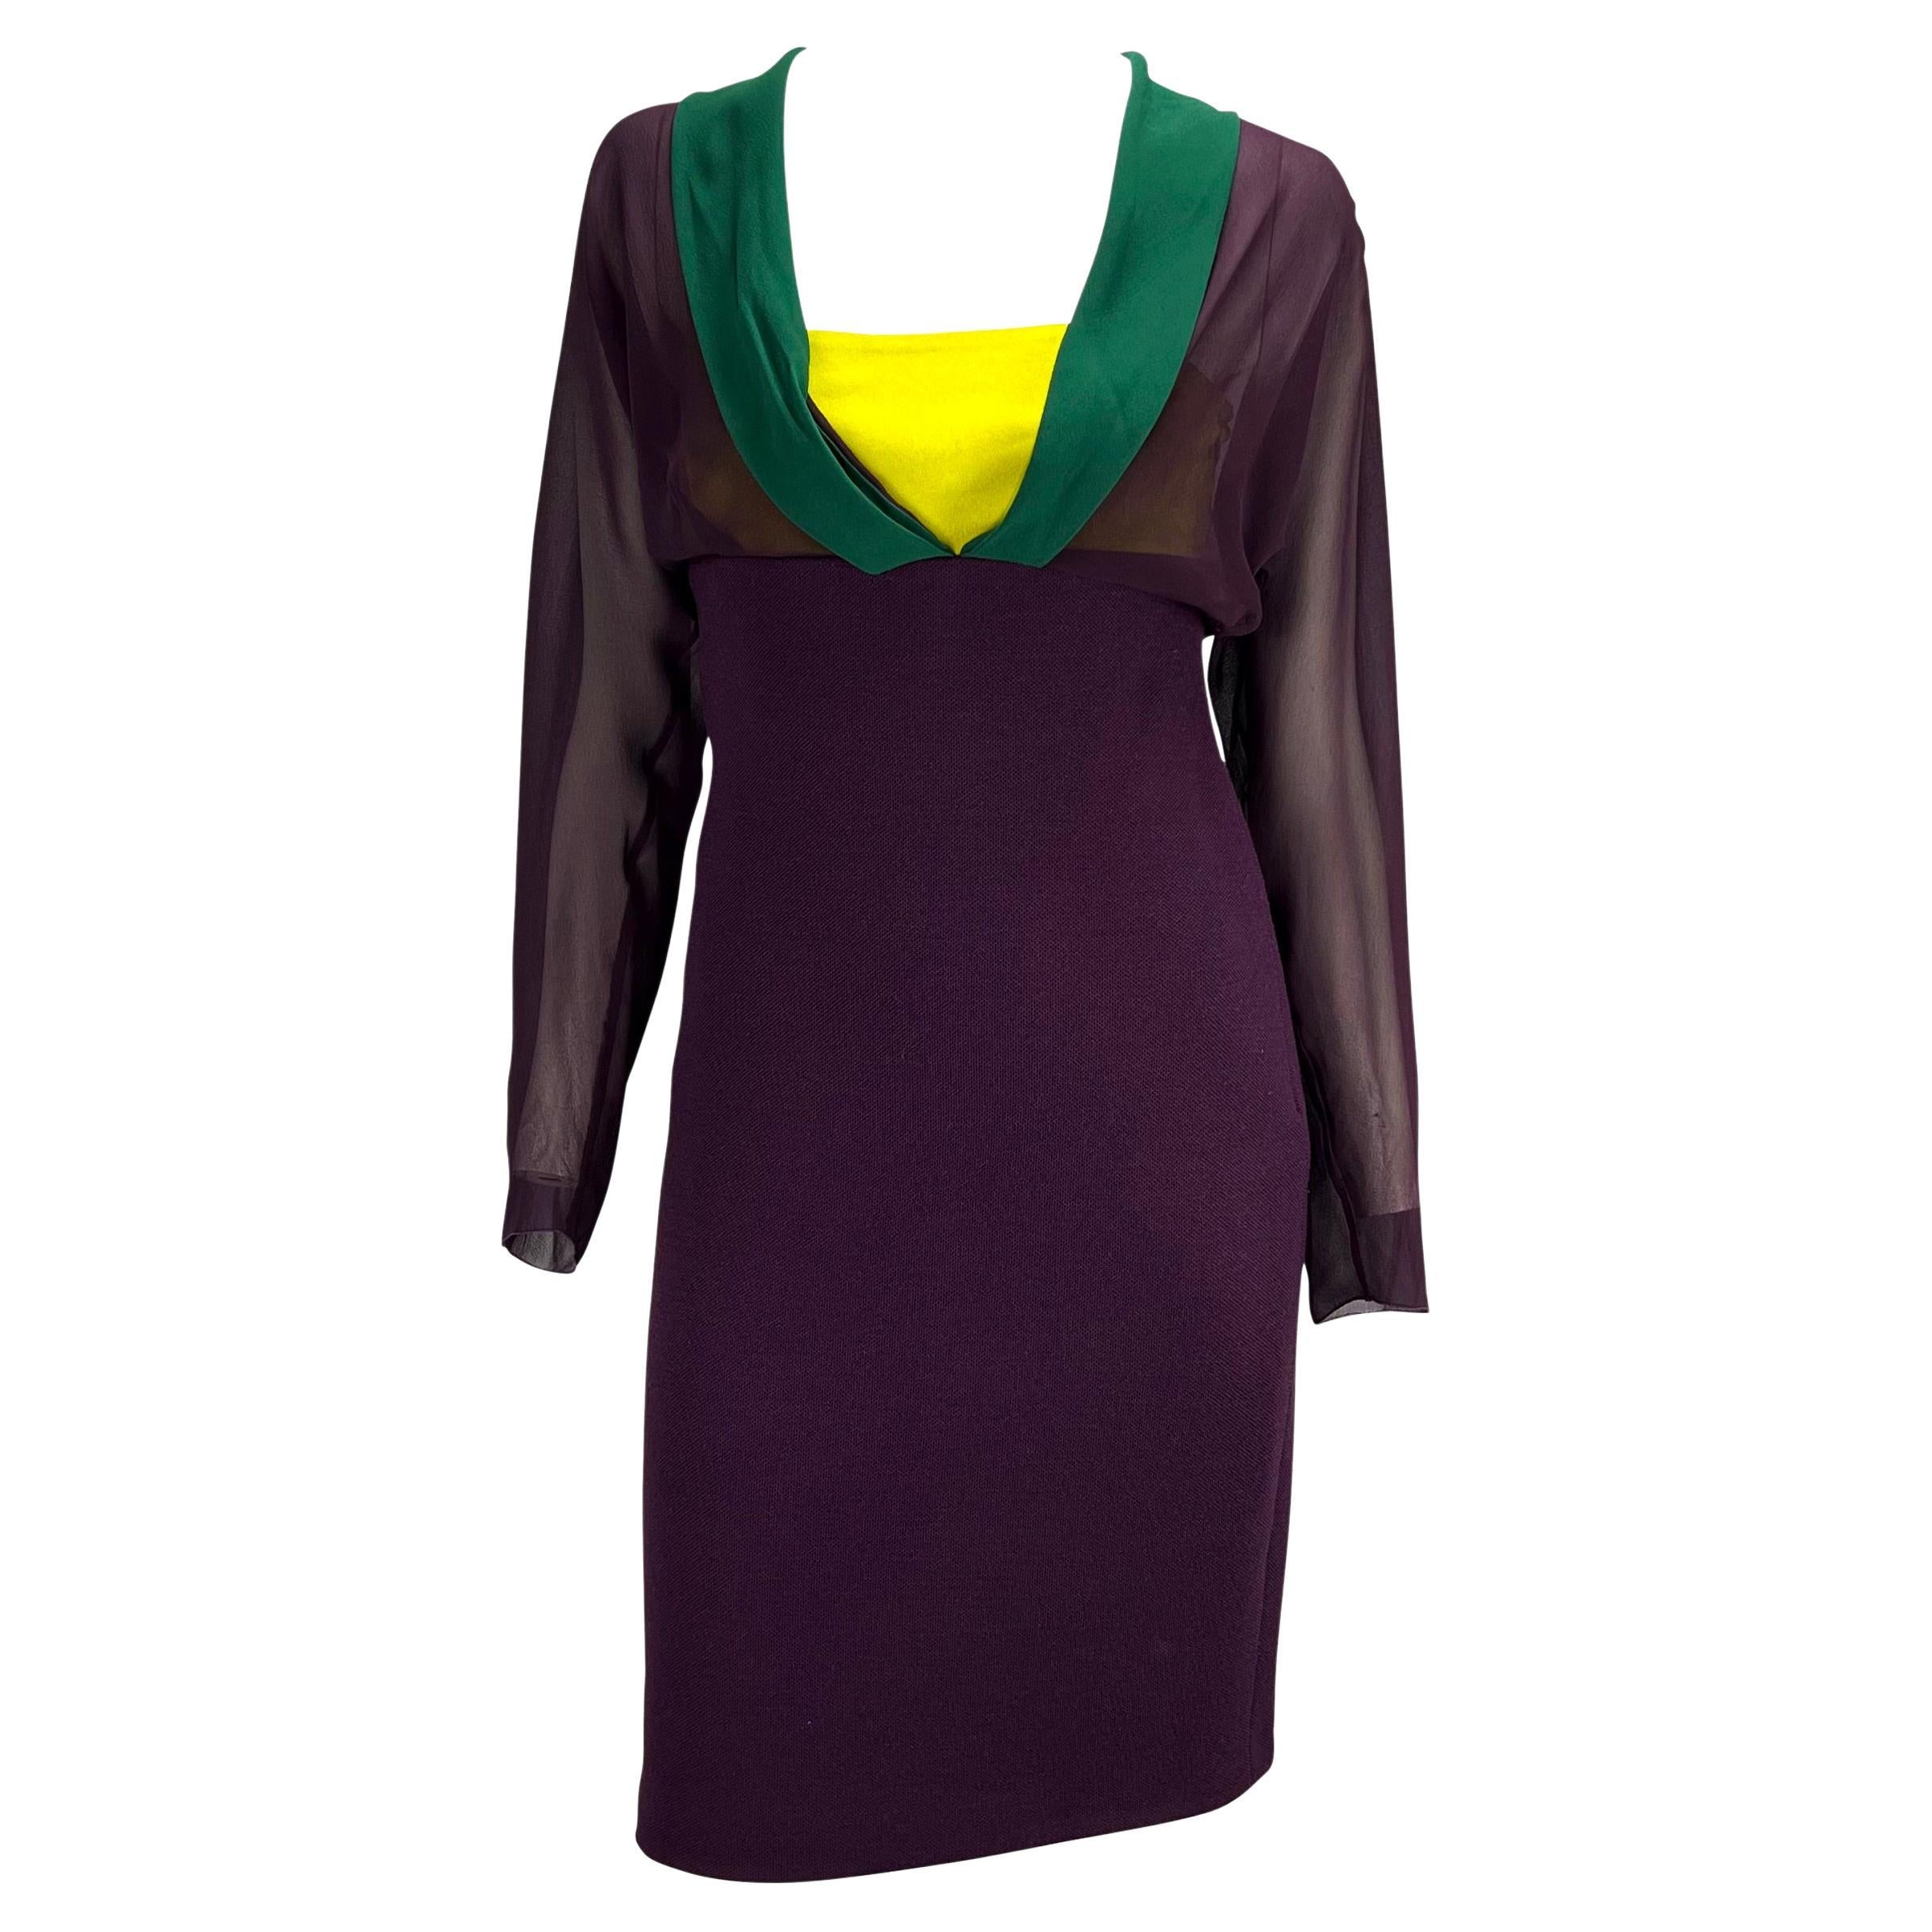  NWT F/W 1997 Gianni Versace Couture Runway Color Block Aubergine Dress For Sale